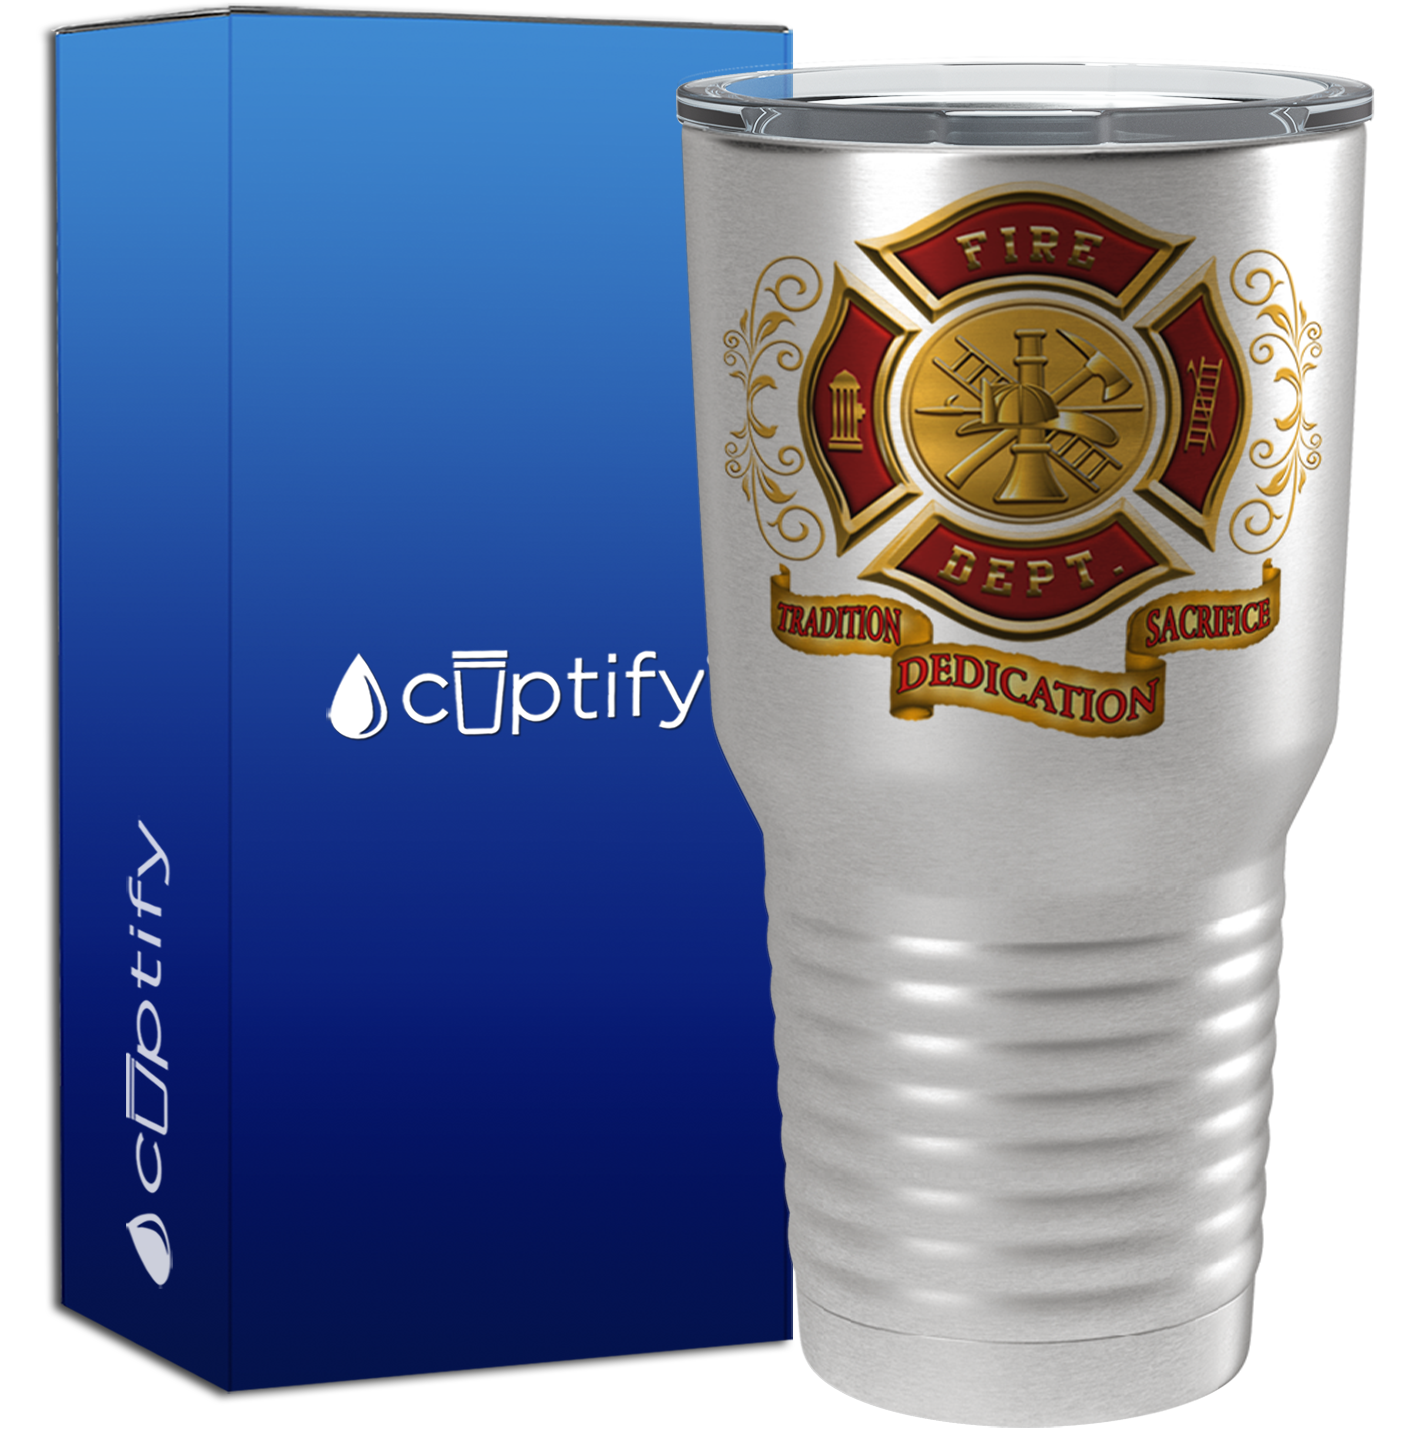 Red and Gold Fire Department Badge on Stainless 30oz Firefighter Tumbler